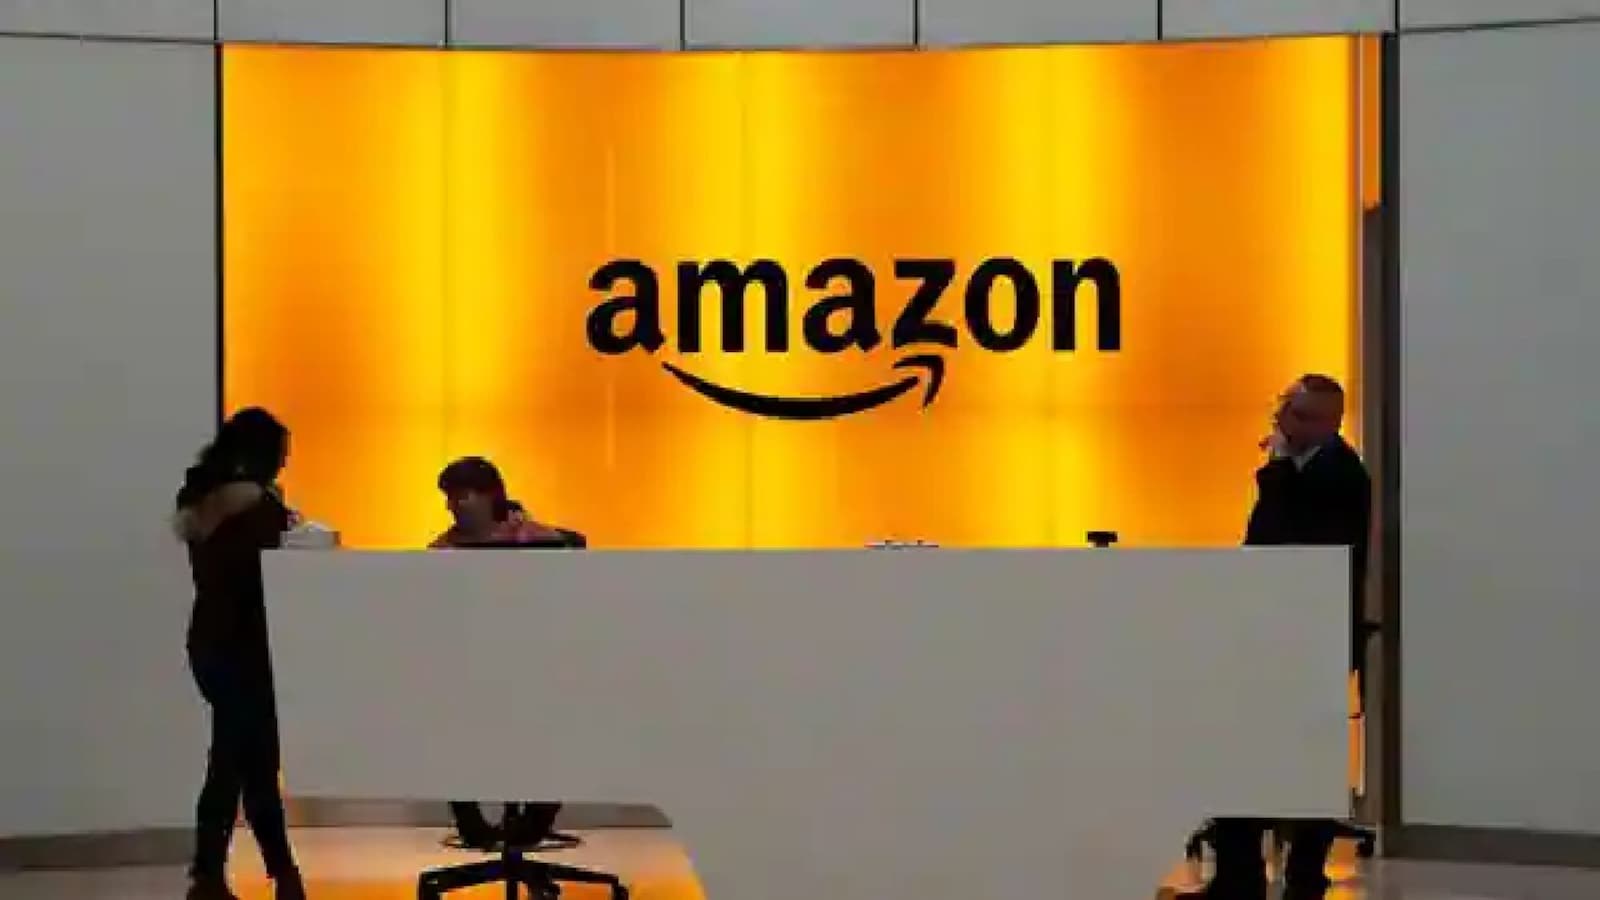 amazon layoffs expected to mount to 20,000, includes top managers: report